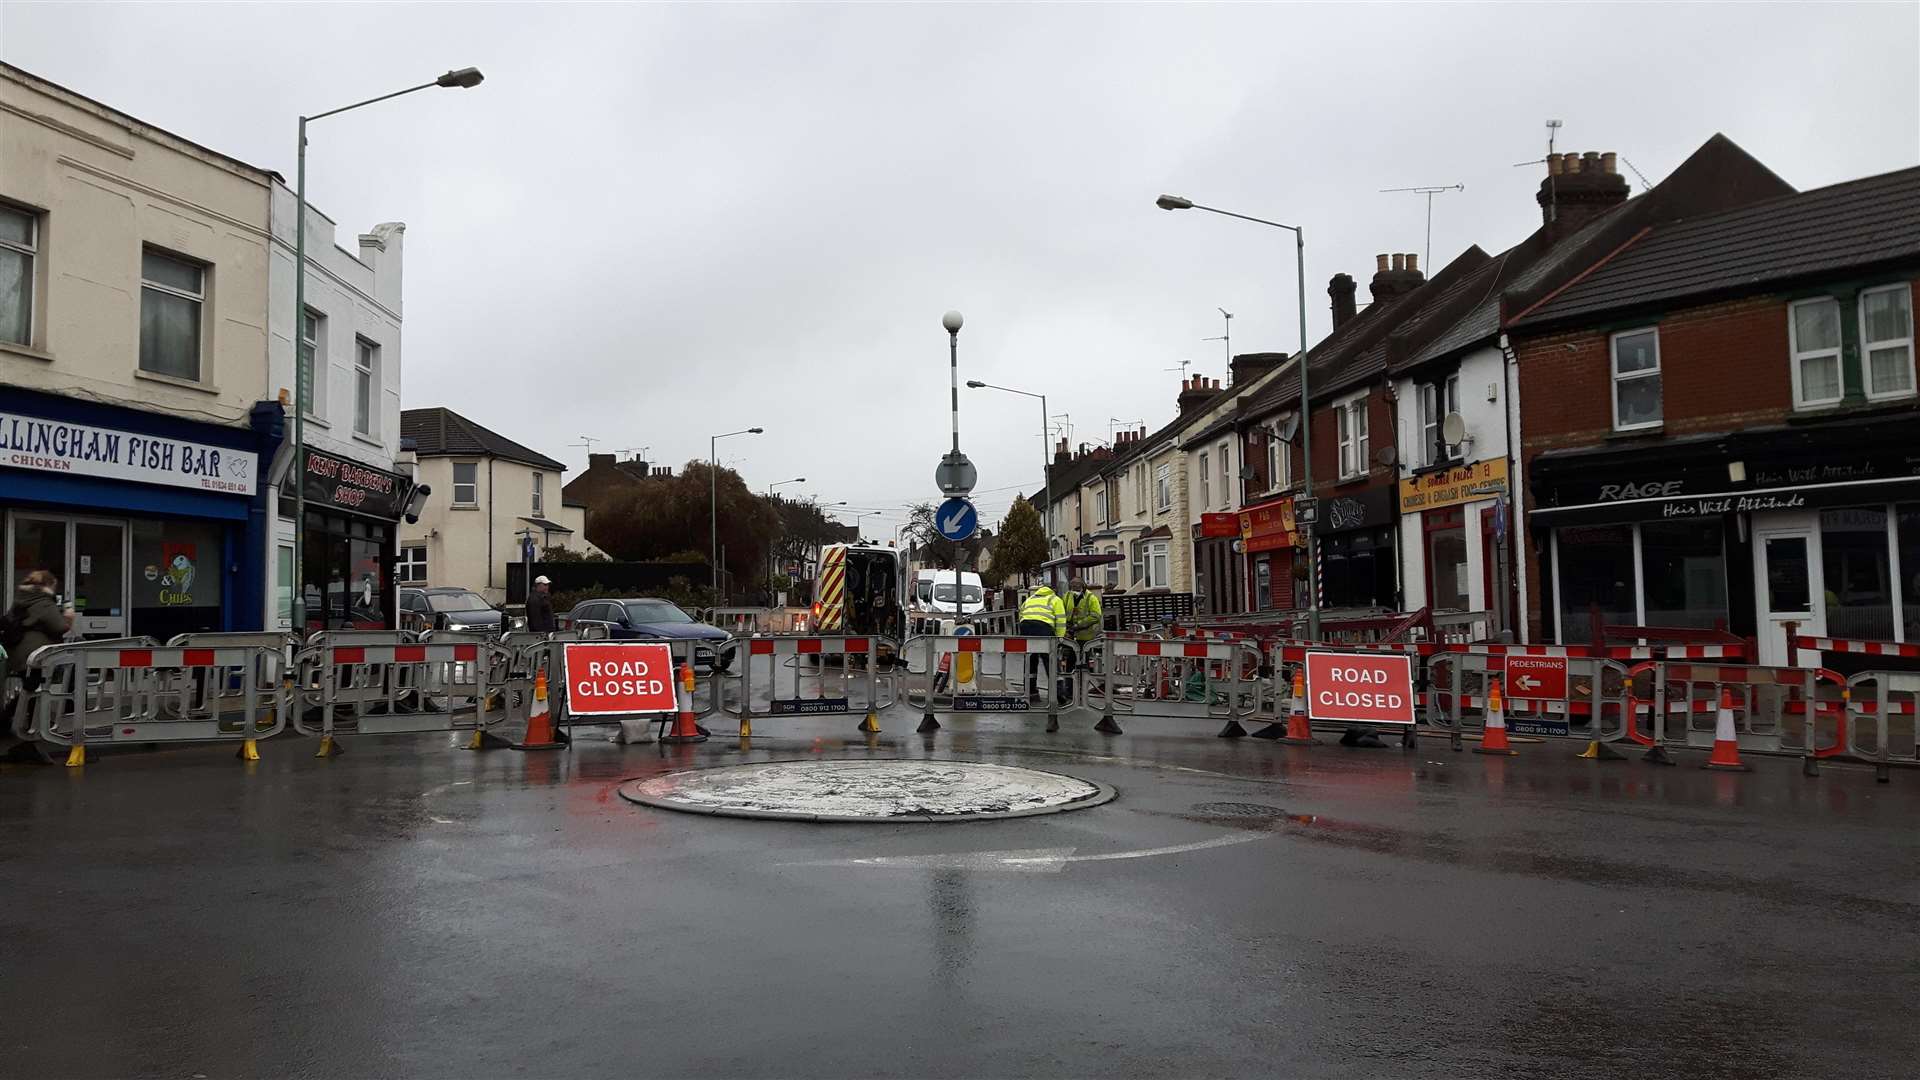 Road closures were put in place for the engineers were fixed the problem (5657850)